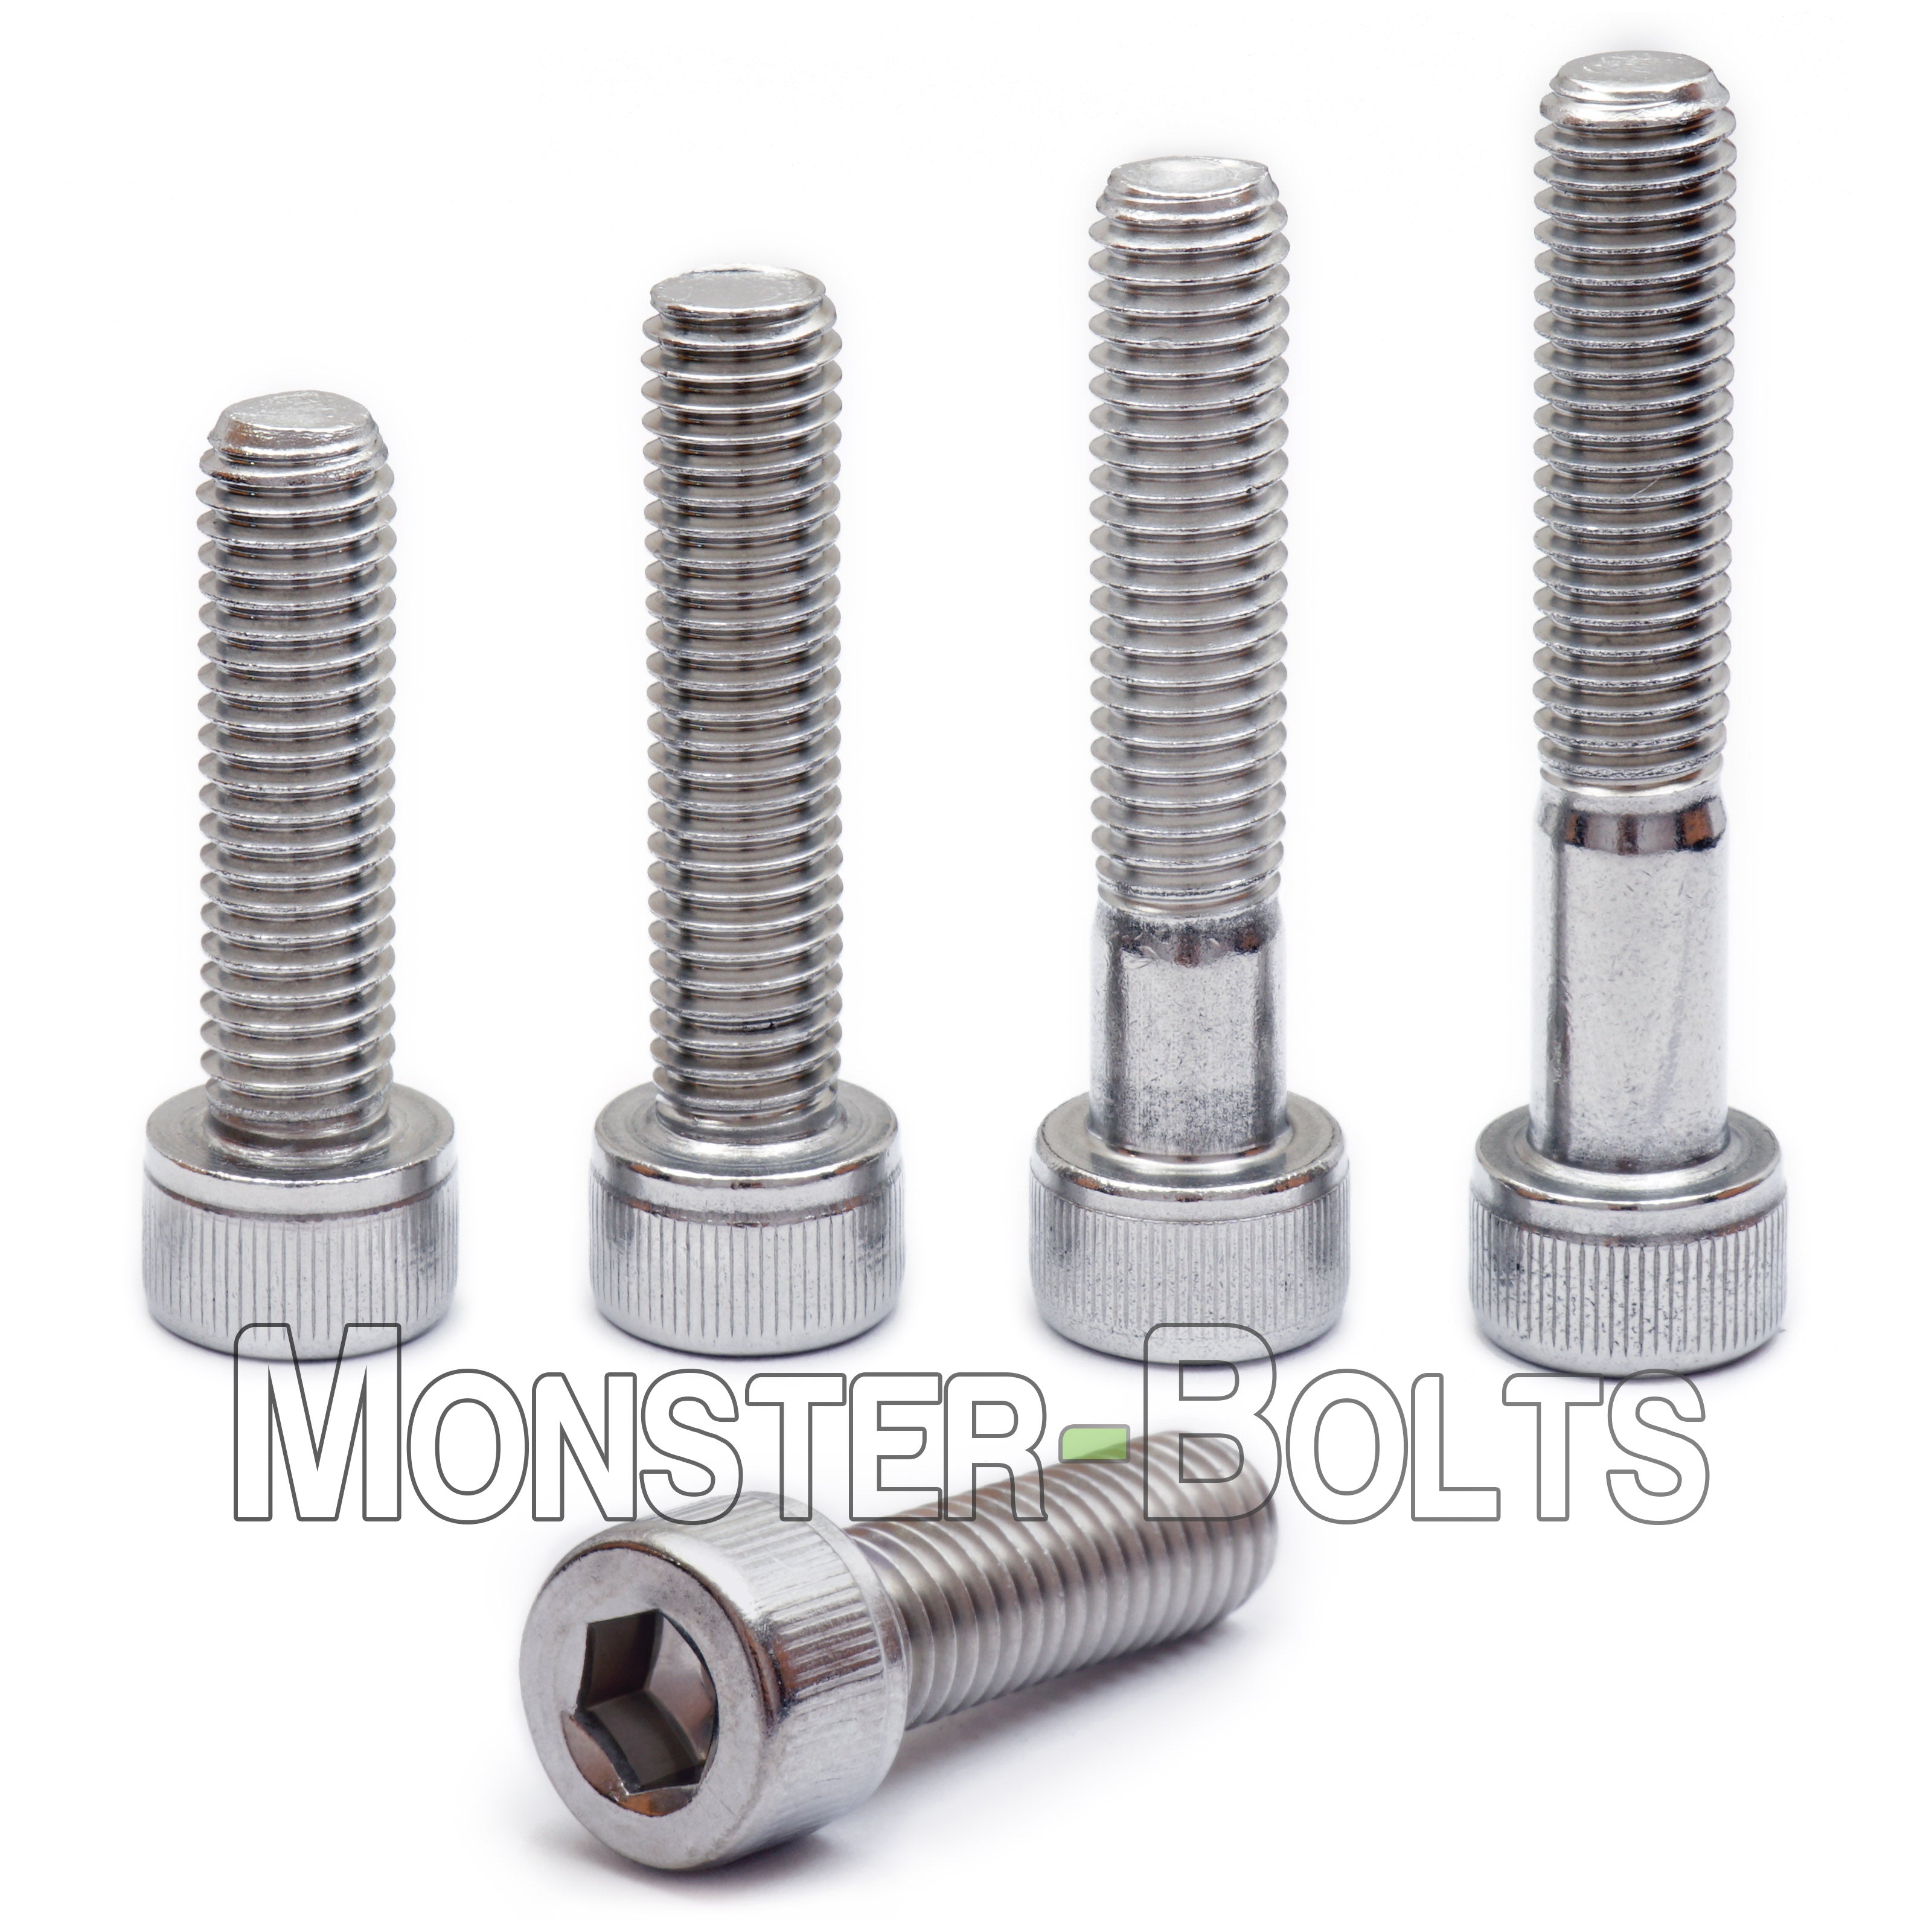 Hex Flange Serrated Cap Bolt Screws 18-8 Stainless Steel 10-32 X Qty 25 - 4